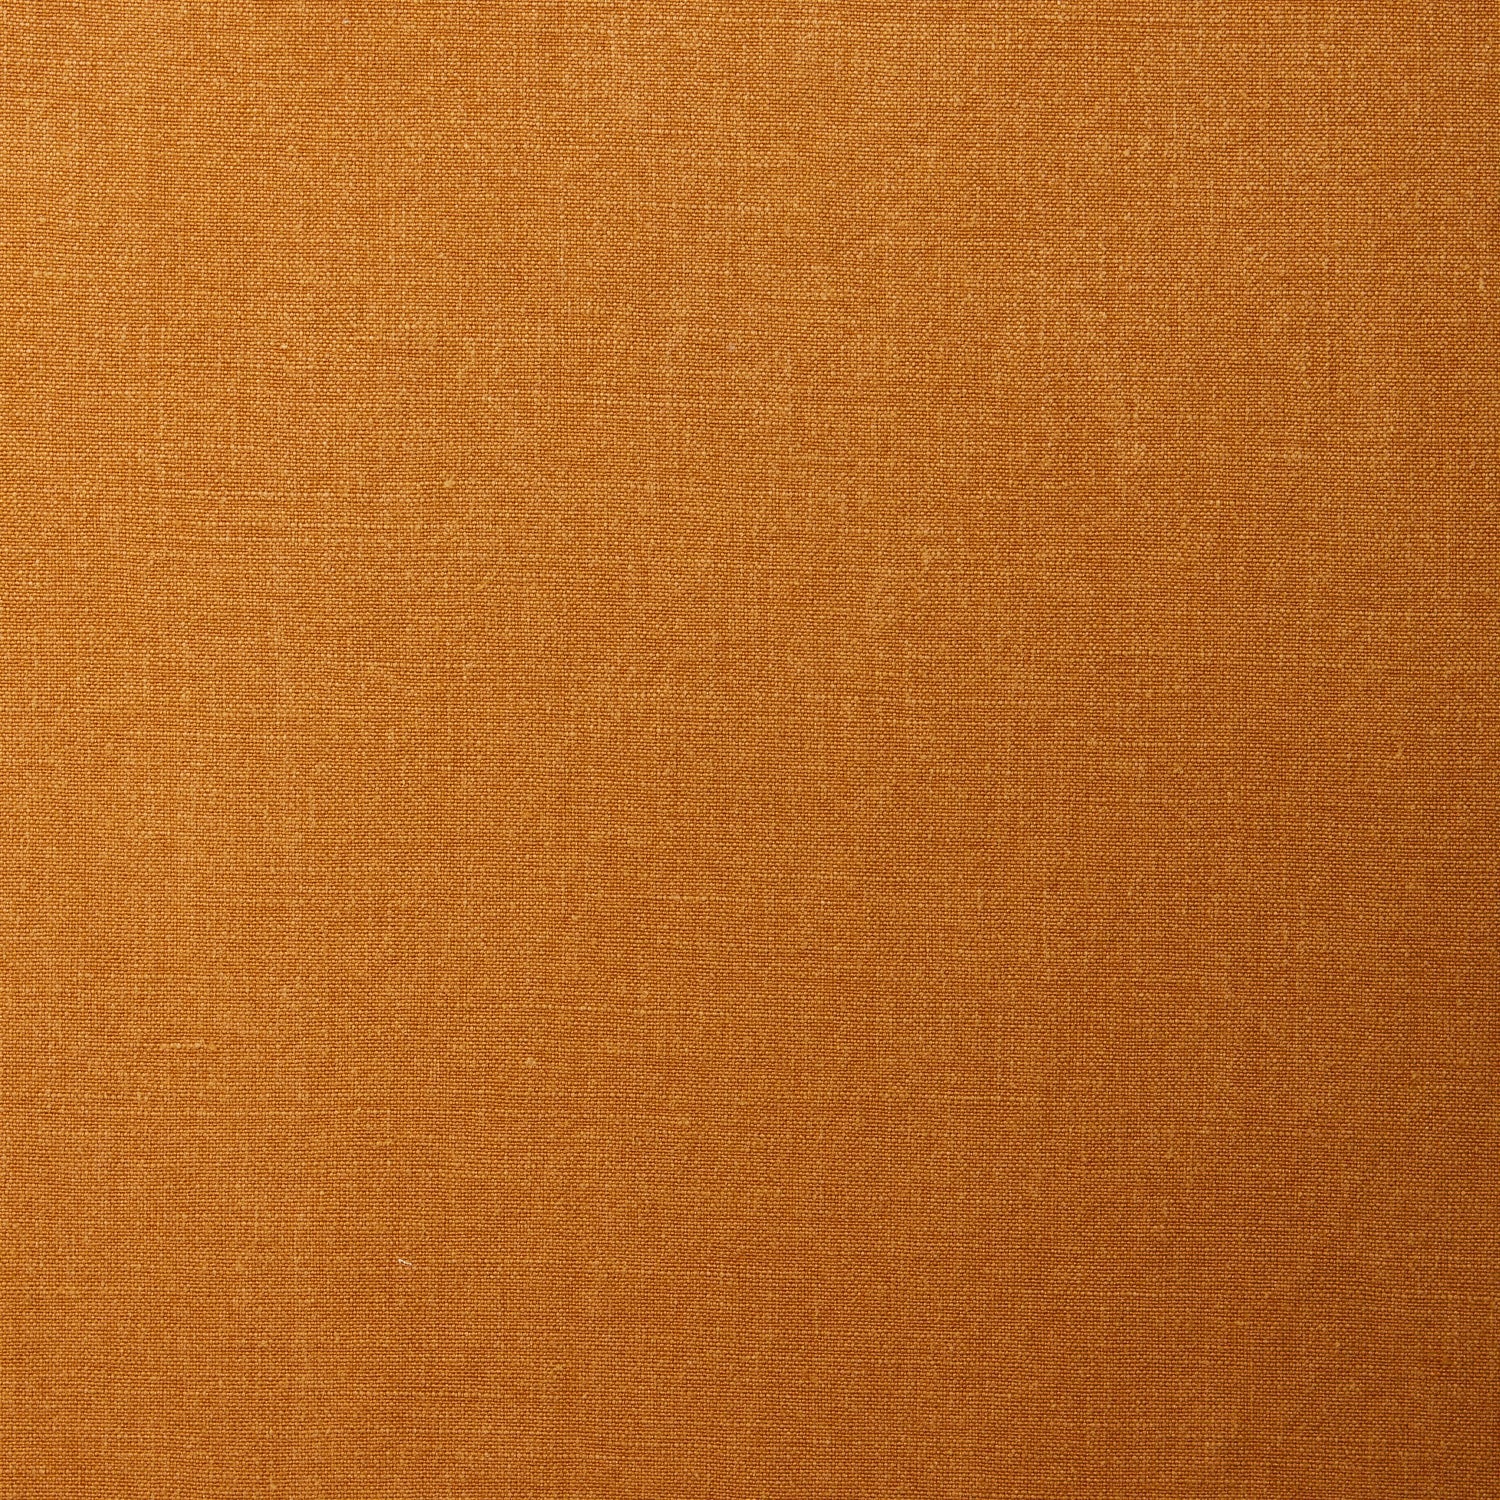 A swatch of linen fabric in a solid gold color.